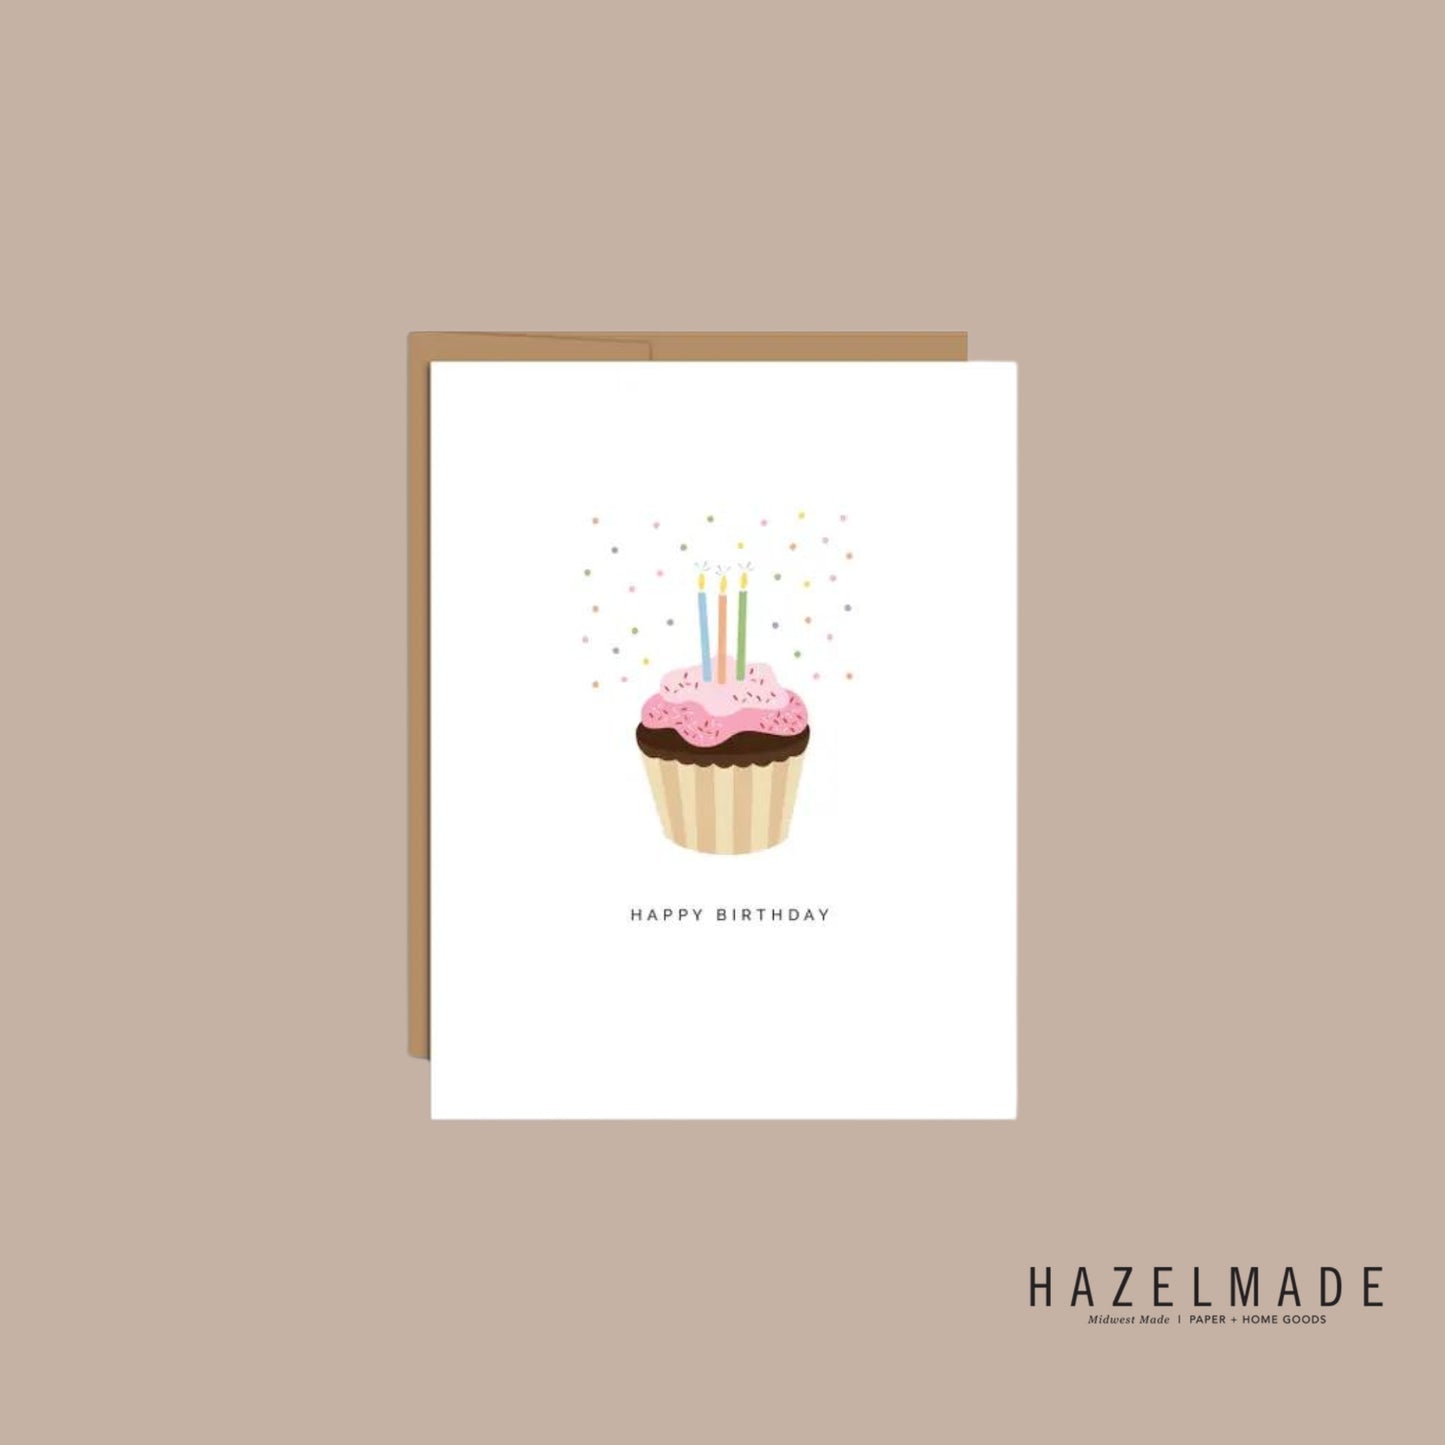 Hazelmade Greeting Cards - Hazelmade - Box Builder Item - KINSHIP GIFT - birthday gift, hazelmade, LDT:GW:RESTRICT - Pittsburgh - gift - boxes - gift - baskets - corporate - gifts - holiday - gifts